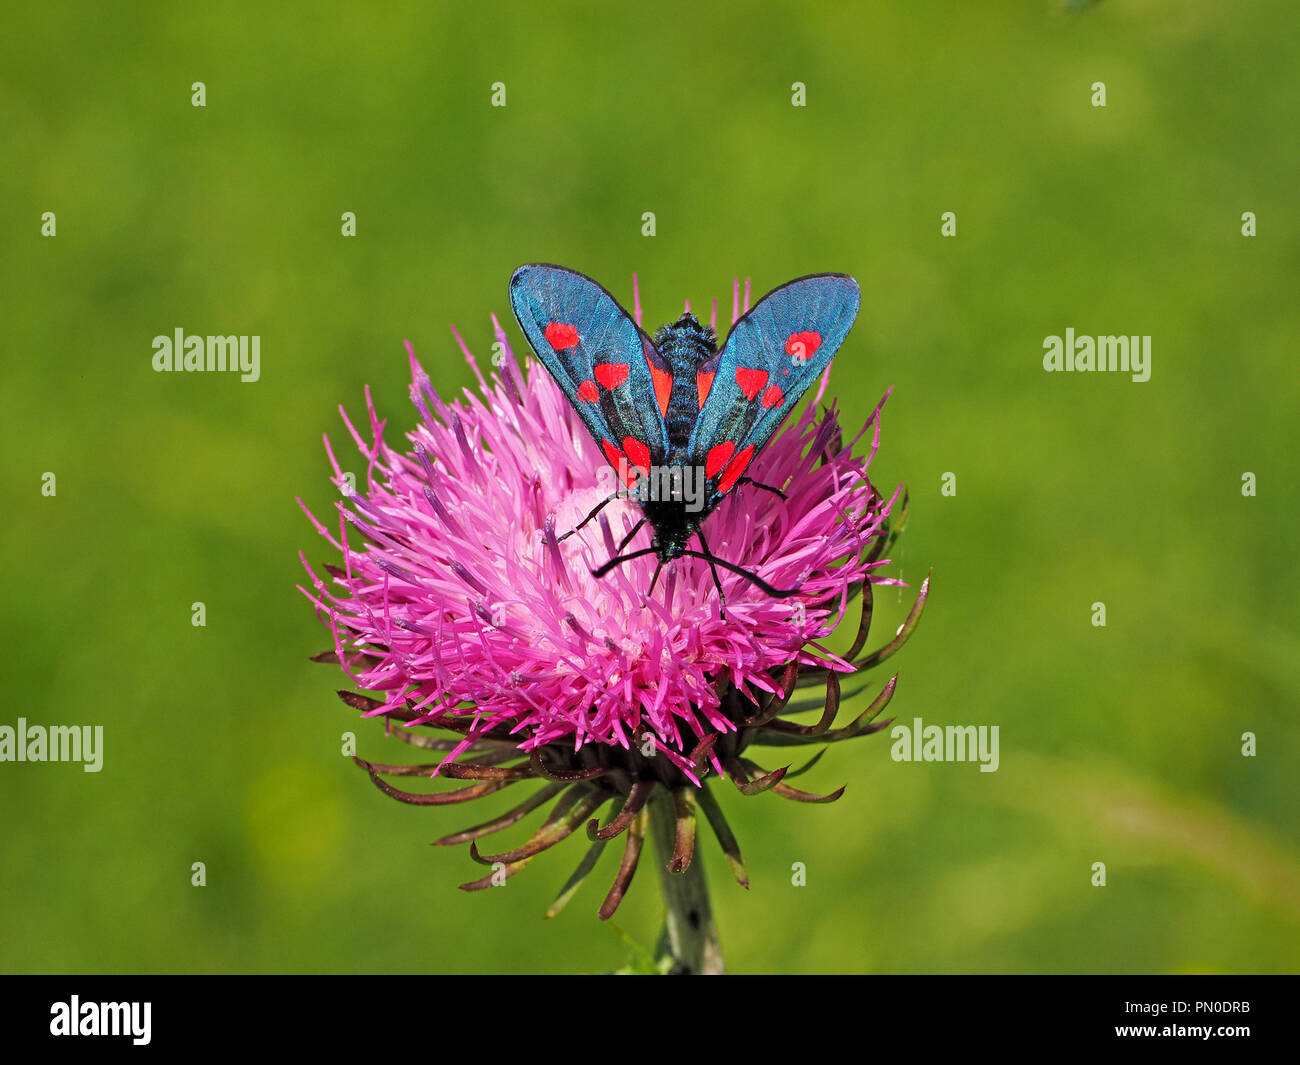 dazzling Five-Spot Burnet Moth (Zygaena trifolii) feeding on purple flowerhead of Welted Thistle (Carduus crispus), in the Ariege Pyrenees of France Stock Photo